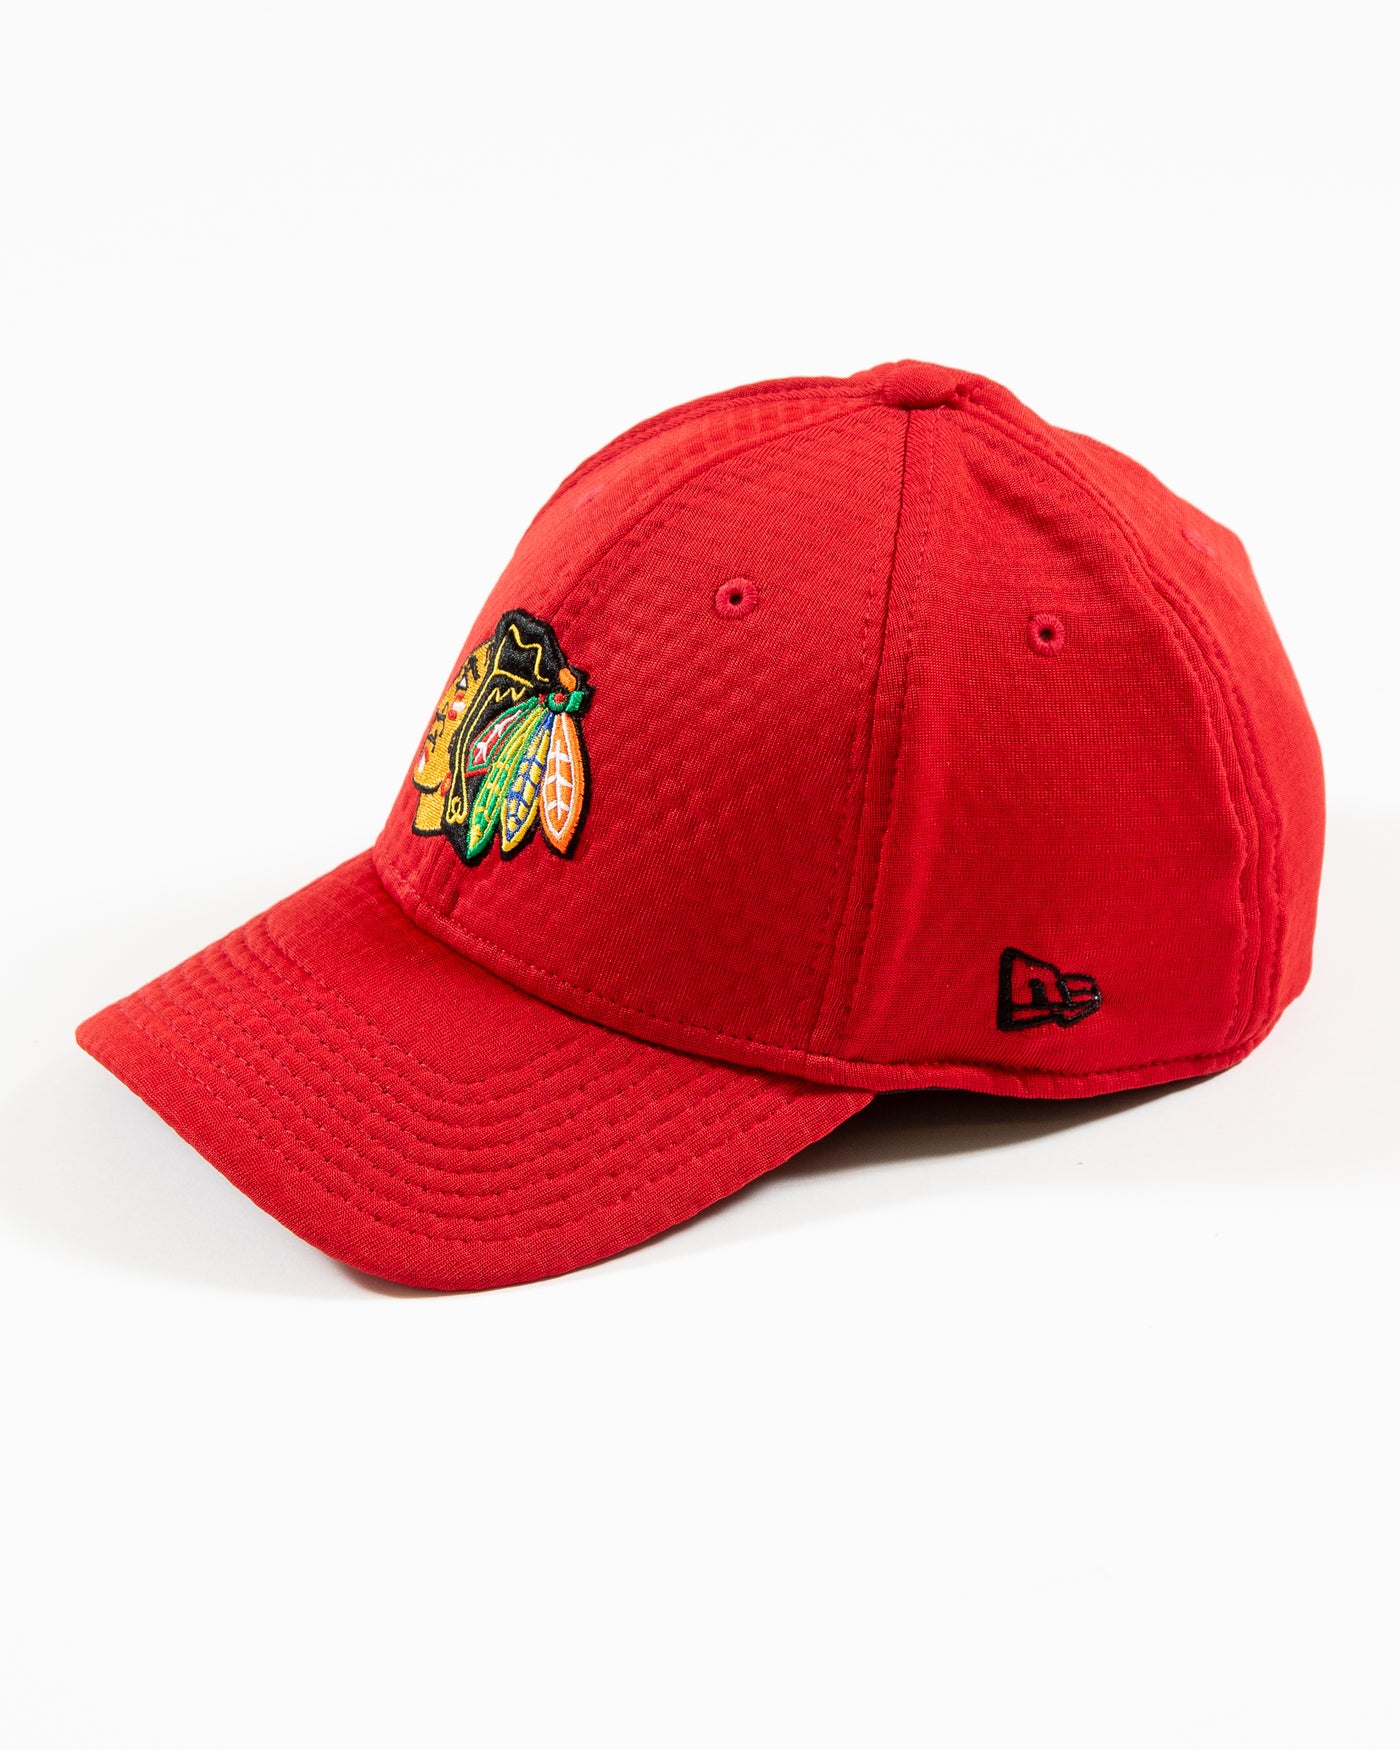 Red New Era 39THIRTY Flex Fit Cap with Chicago Blackhawks primary logo on front - left side lay flat